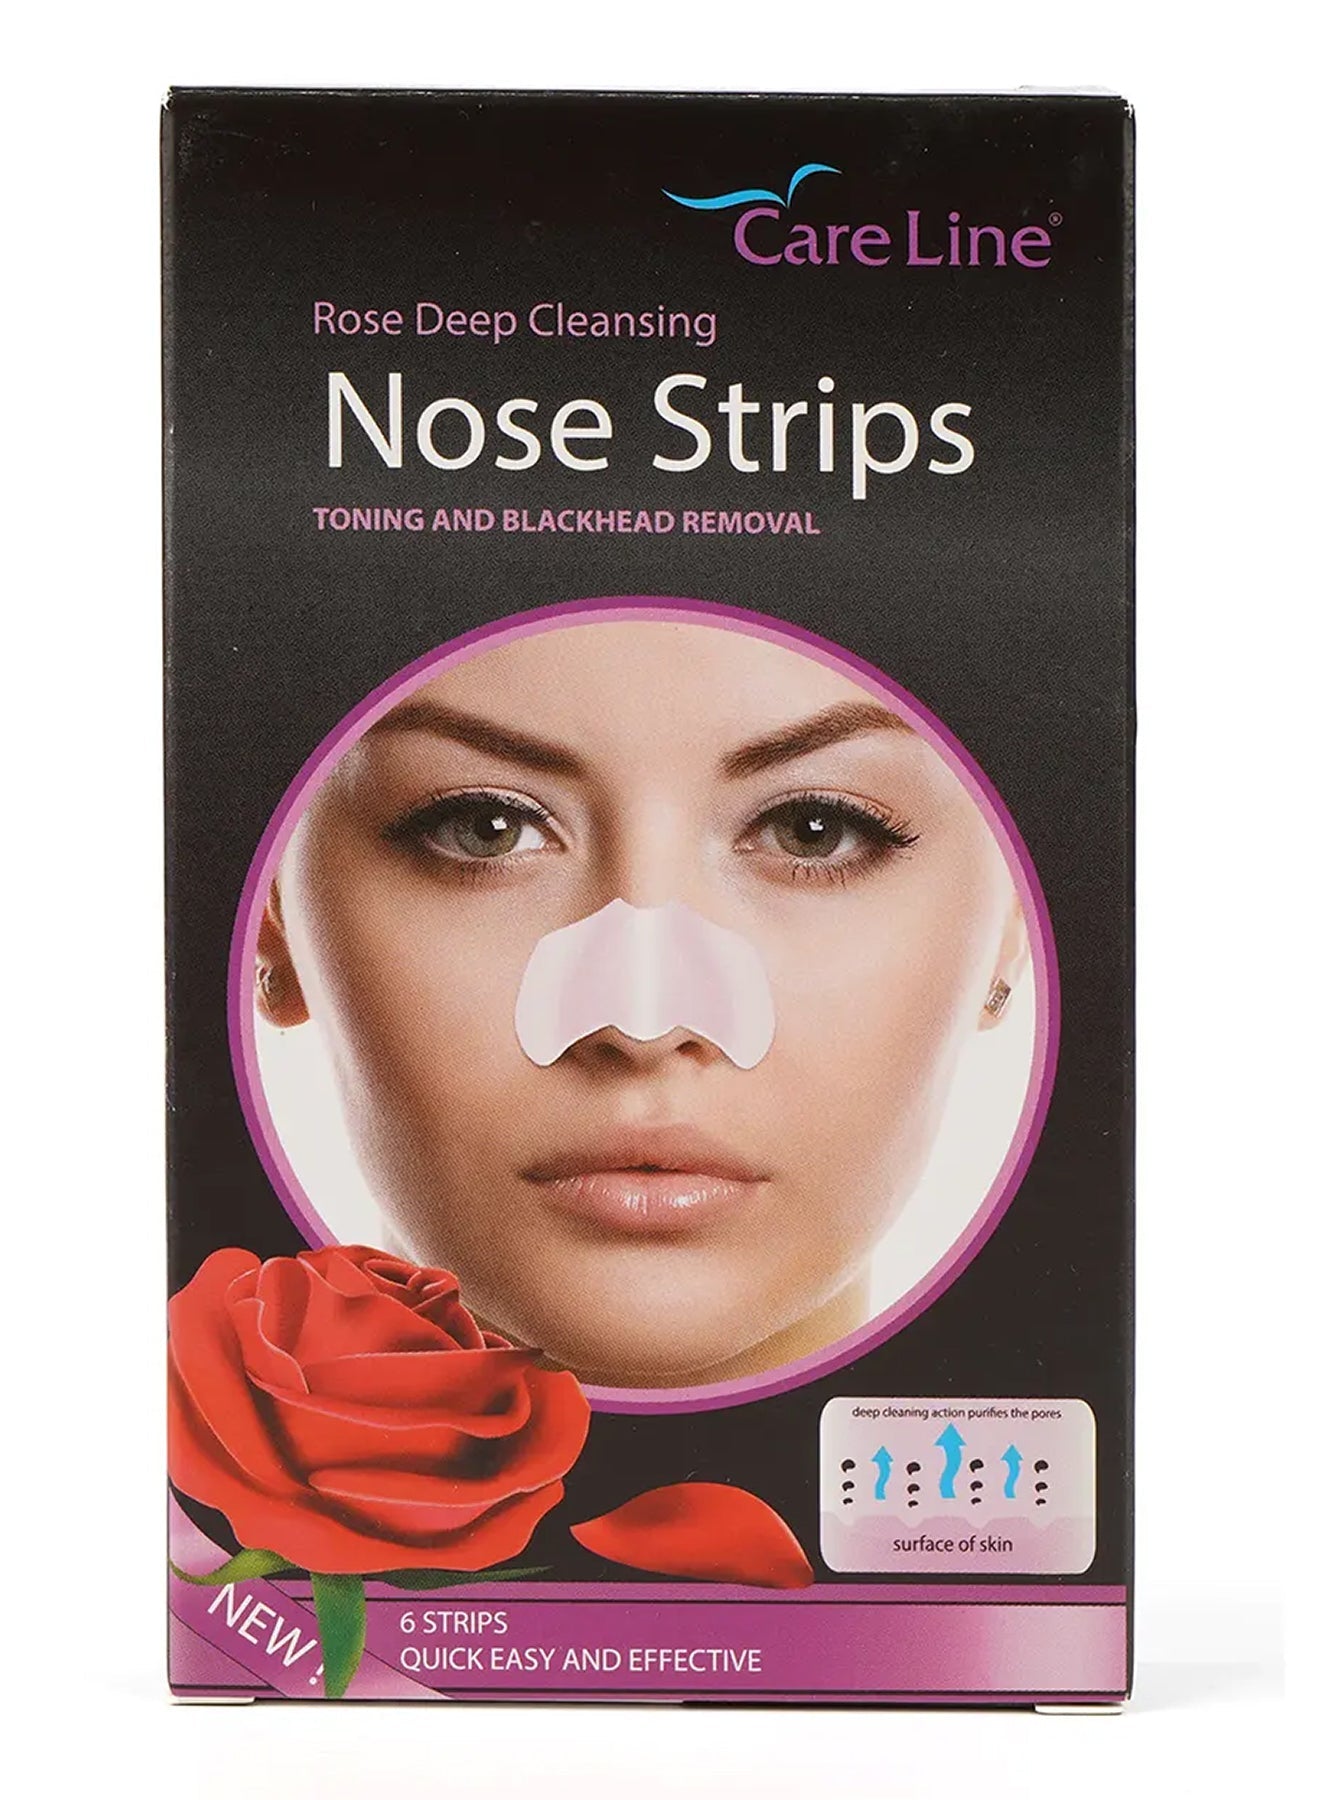 Care Line Nose Strips 6 Strips Rose Deep Cleansing 1pc Value Pack of 4 